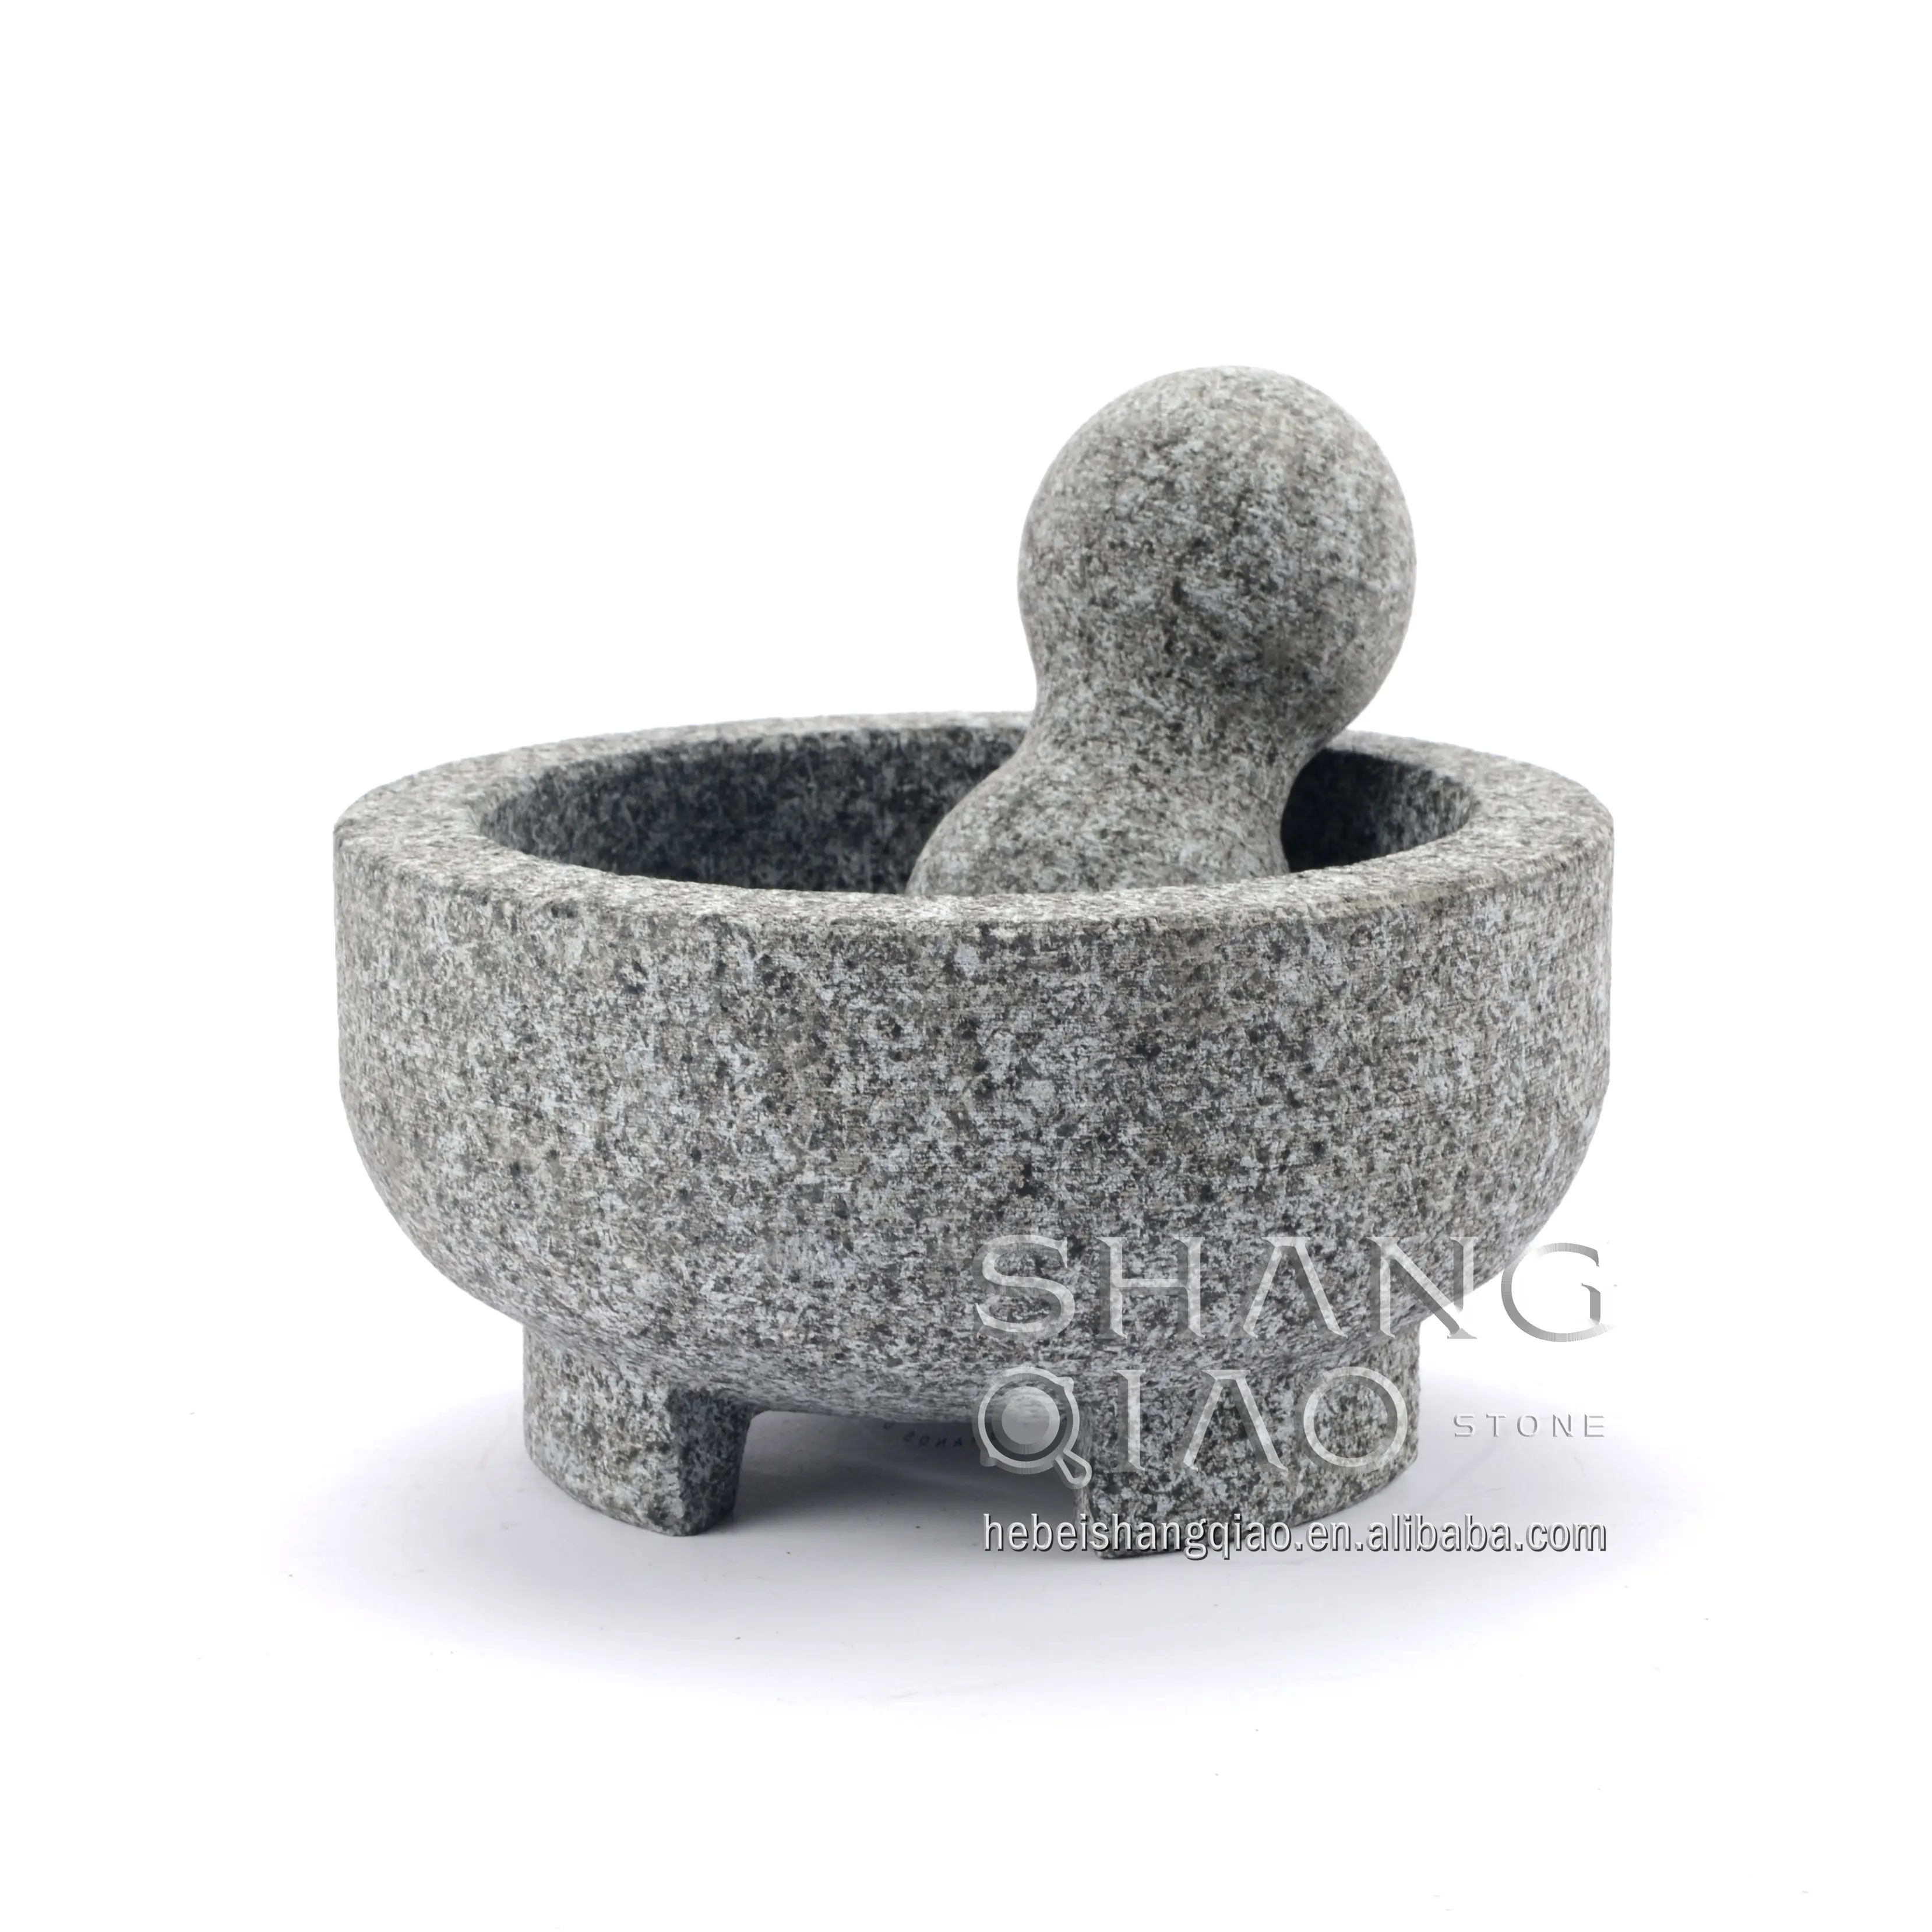 Premium Quality Mortar and Pestle Sturdy Mortar and Pestle Set Exquisite Handcrafted Granite Mortar and Pestle Set